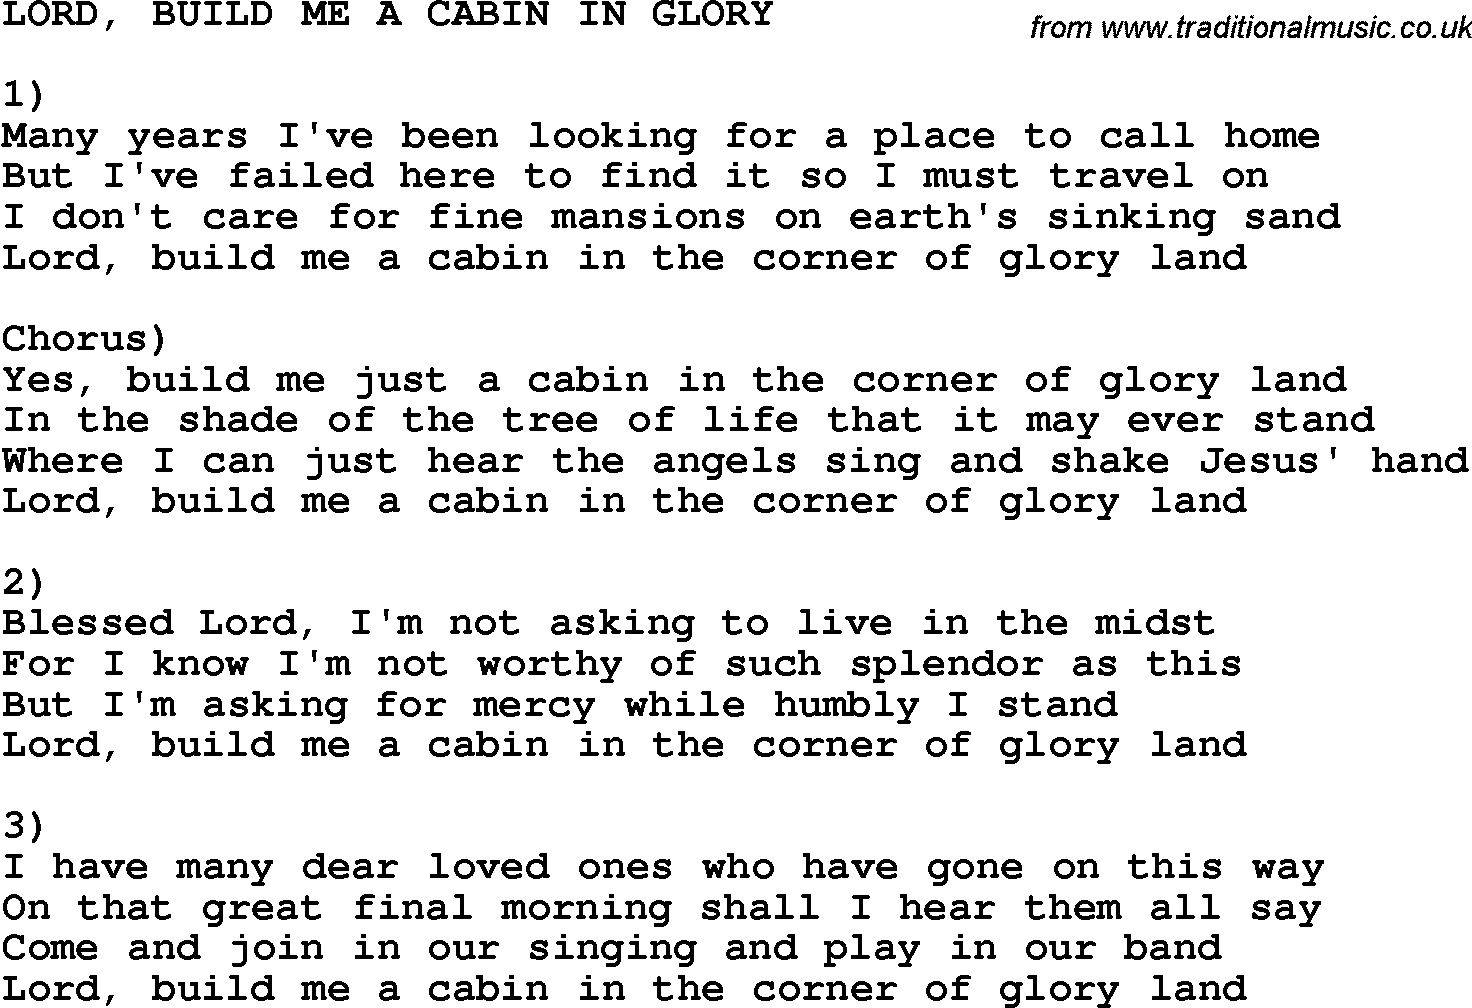 Country, Southern and Bluegrass Gospel Song Lord, Build Me A Cabin In Glory lyrics 